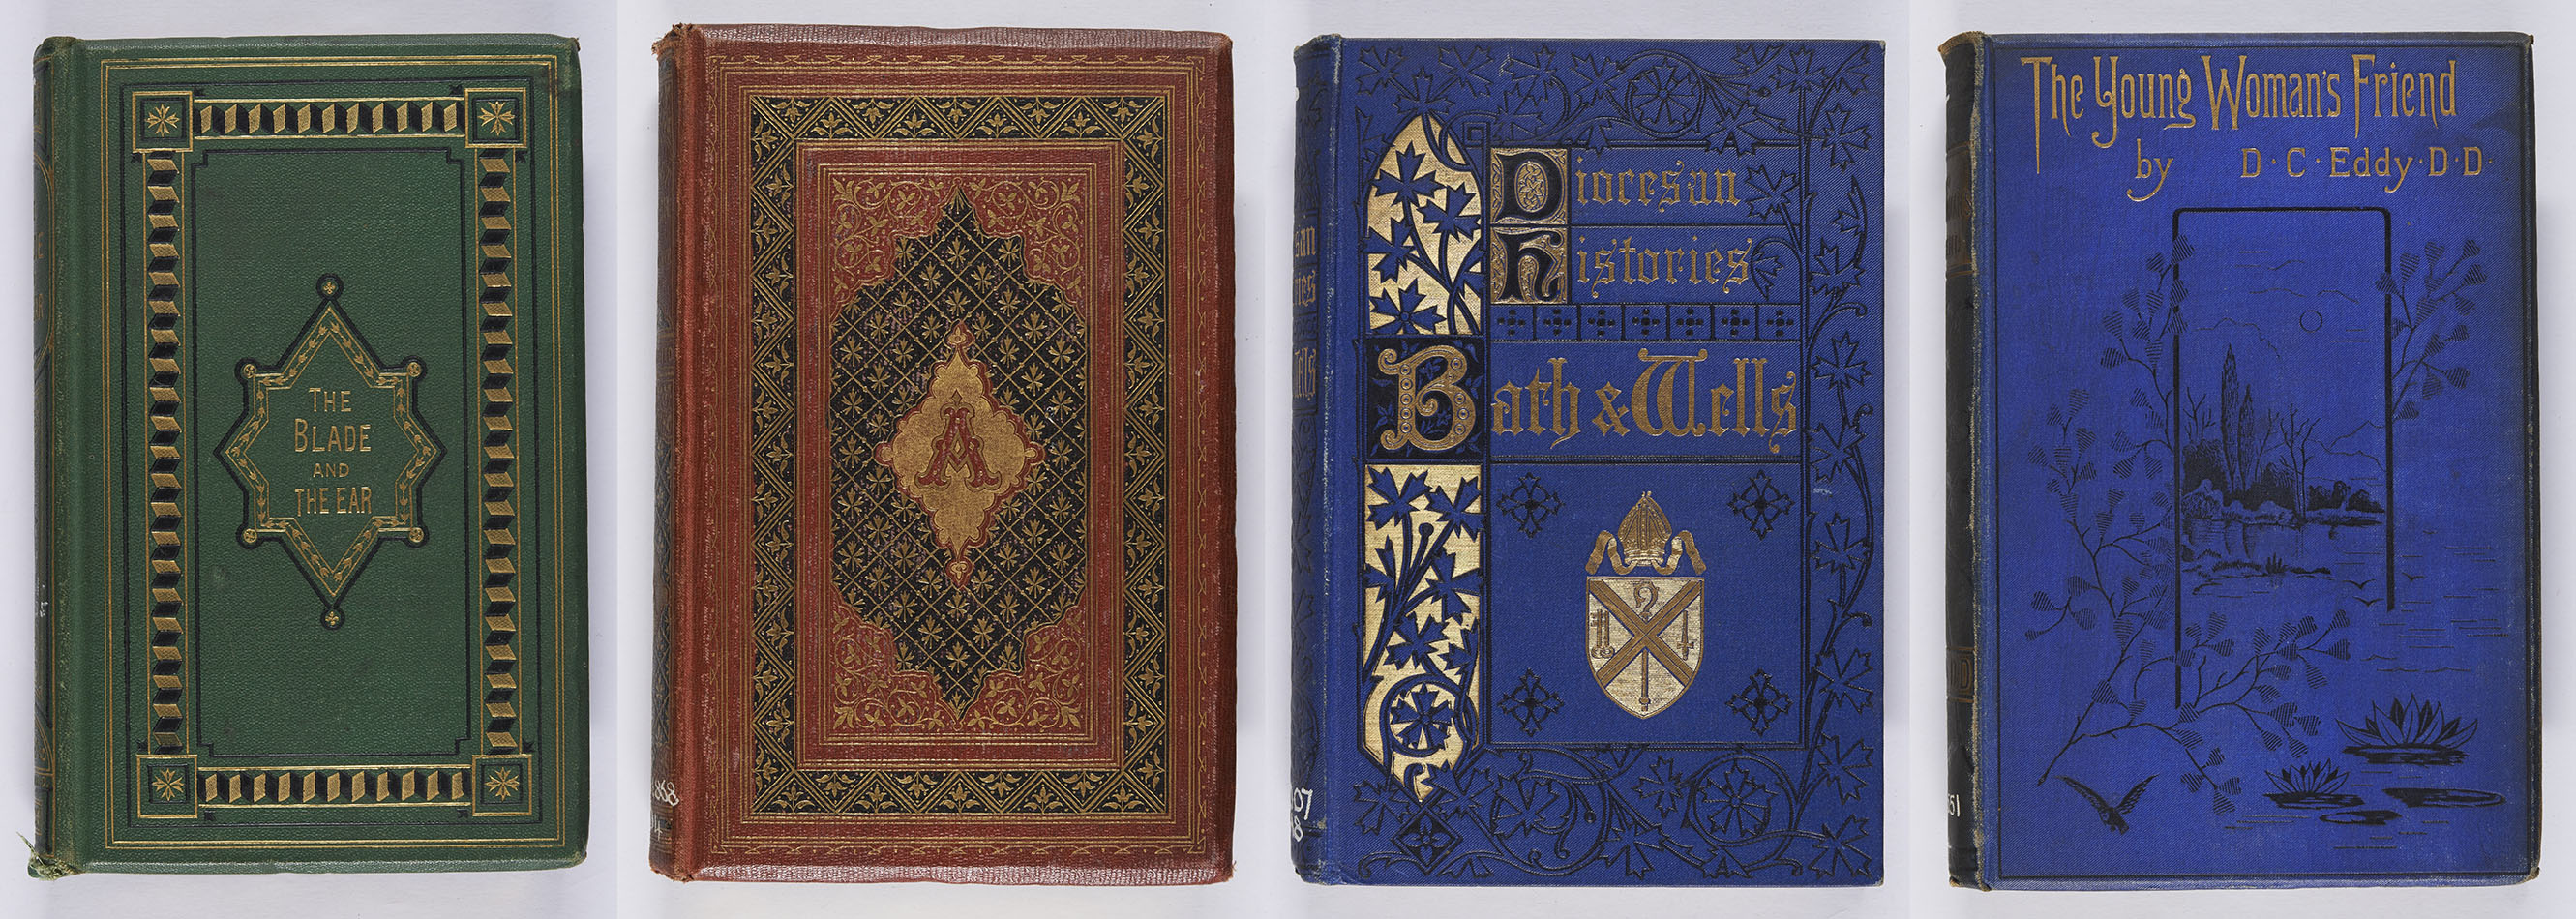 These are examples of the different use of black and gold blocking; I like the simplicity of the final binding. The blade and the ear: a book for young men (Edinburgh: William P. Nimmo, [1870]), r BV4541.B5 ; Nathaniel Hawthorne, The scarlet letter (London: Charles H. Clarke, [1859]), s PS1868.D4 ; William Hunt, The Somerset diocese (London: Society for Promoting Christian Knowledge, 1885), s BX5107.B3H8 ; Daniel C. Eddy, The young woman’s friend (London: Walter Scott, 1885), s BV4551.E4. 